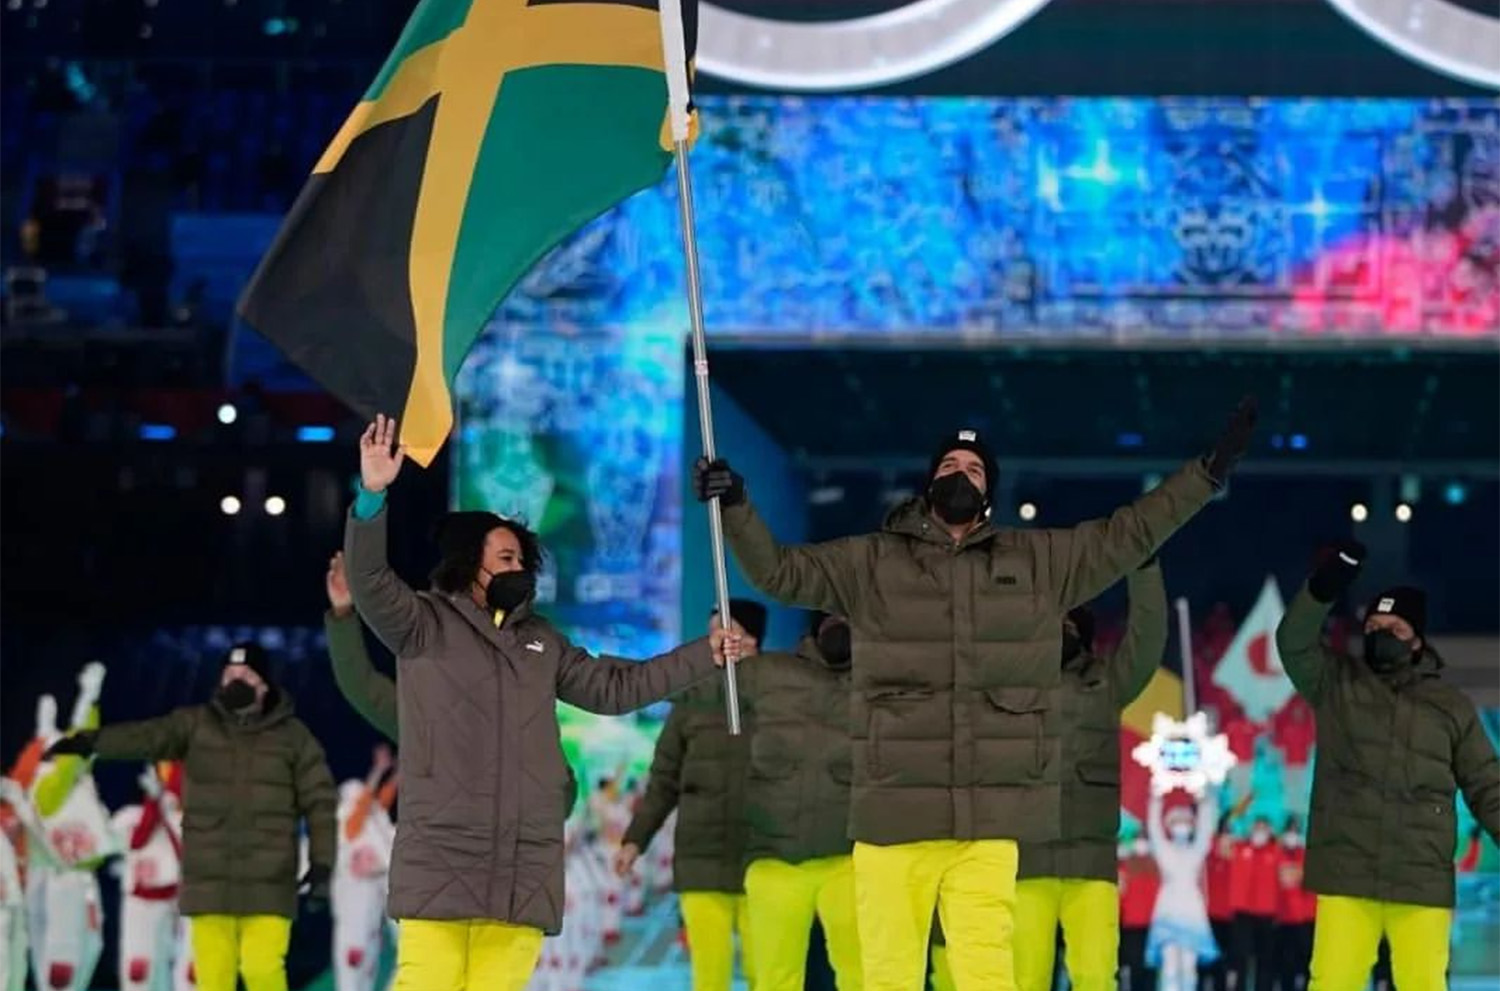 Benji Alexander carrying the flag for Jamaica at the 2022 Olympic Winter Games opening ceremony